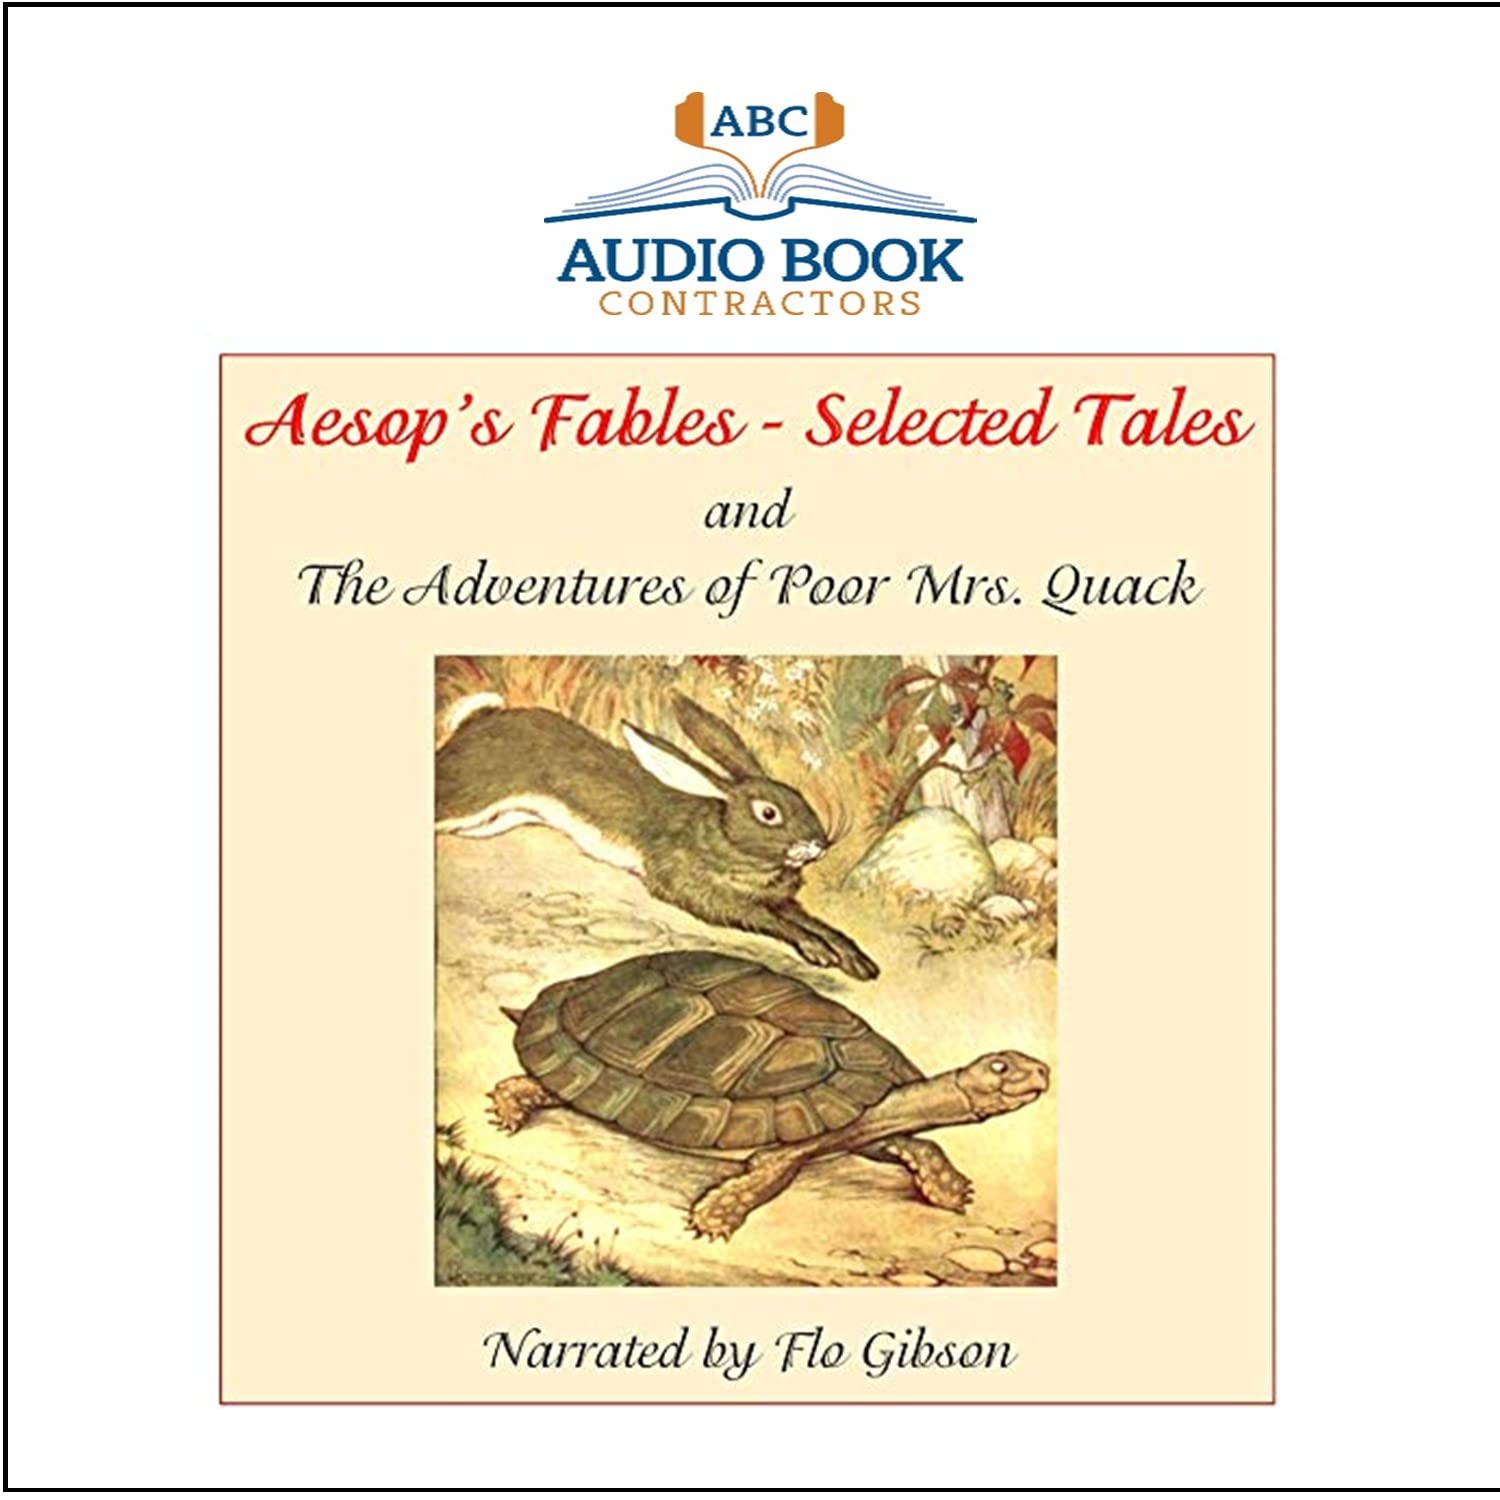 Aesop's Fables - Selected Stories and The Adventures of Poor Mrs. Quack (Classic Books on CD Collection)